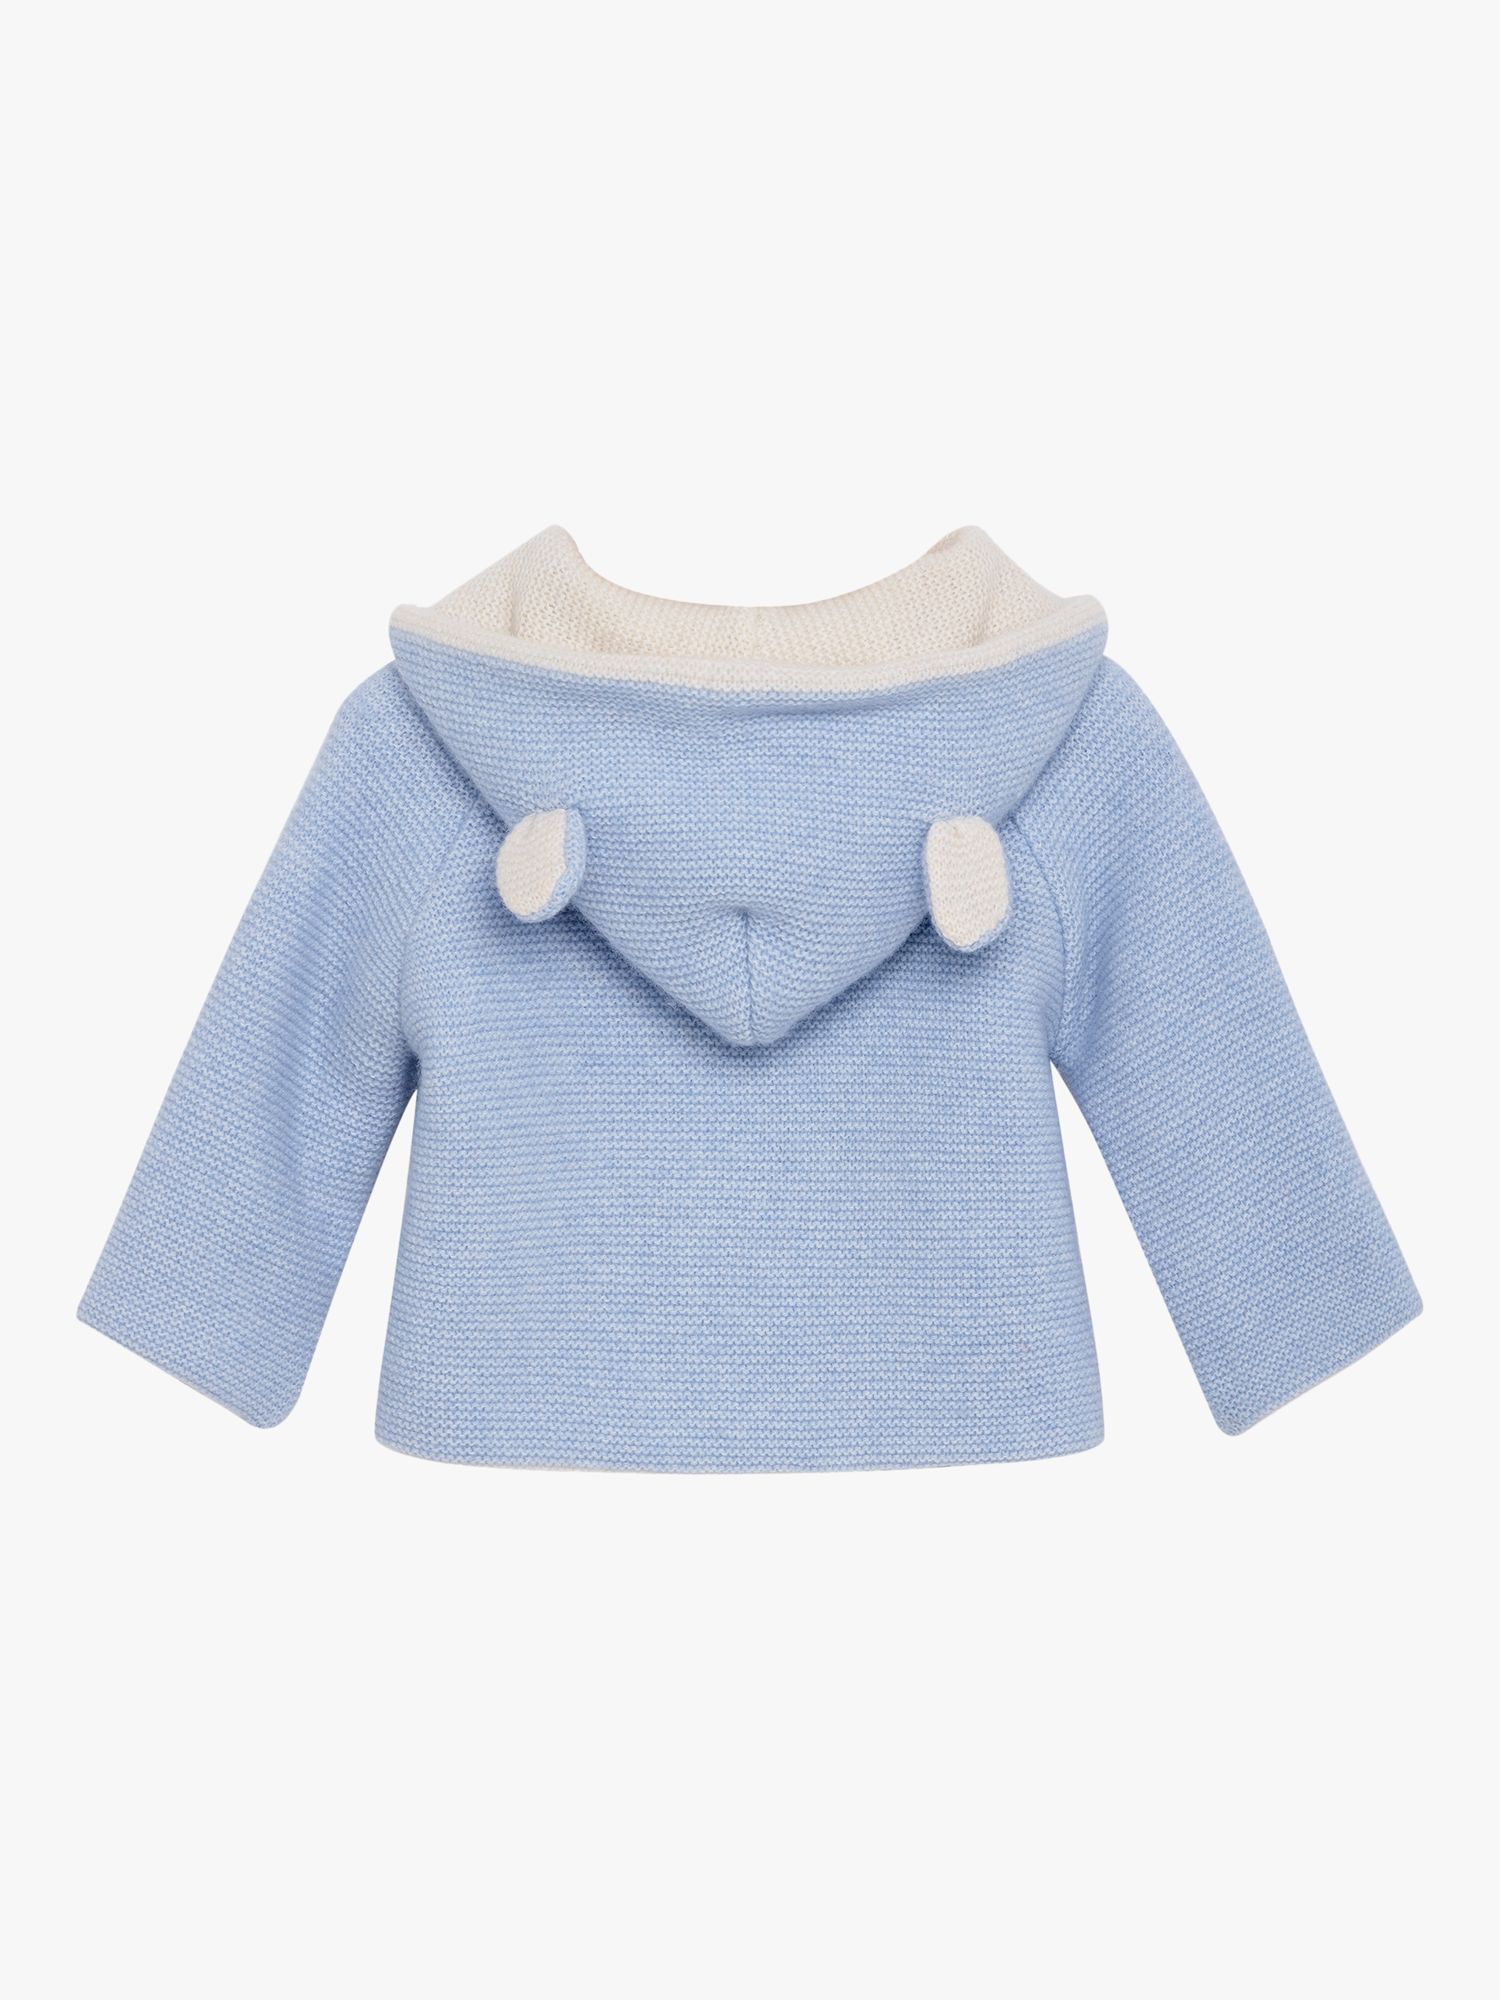 Buy Trotters Lapinou Baby Teddy Cashmere Blend Coat Online at johnlewis.com